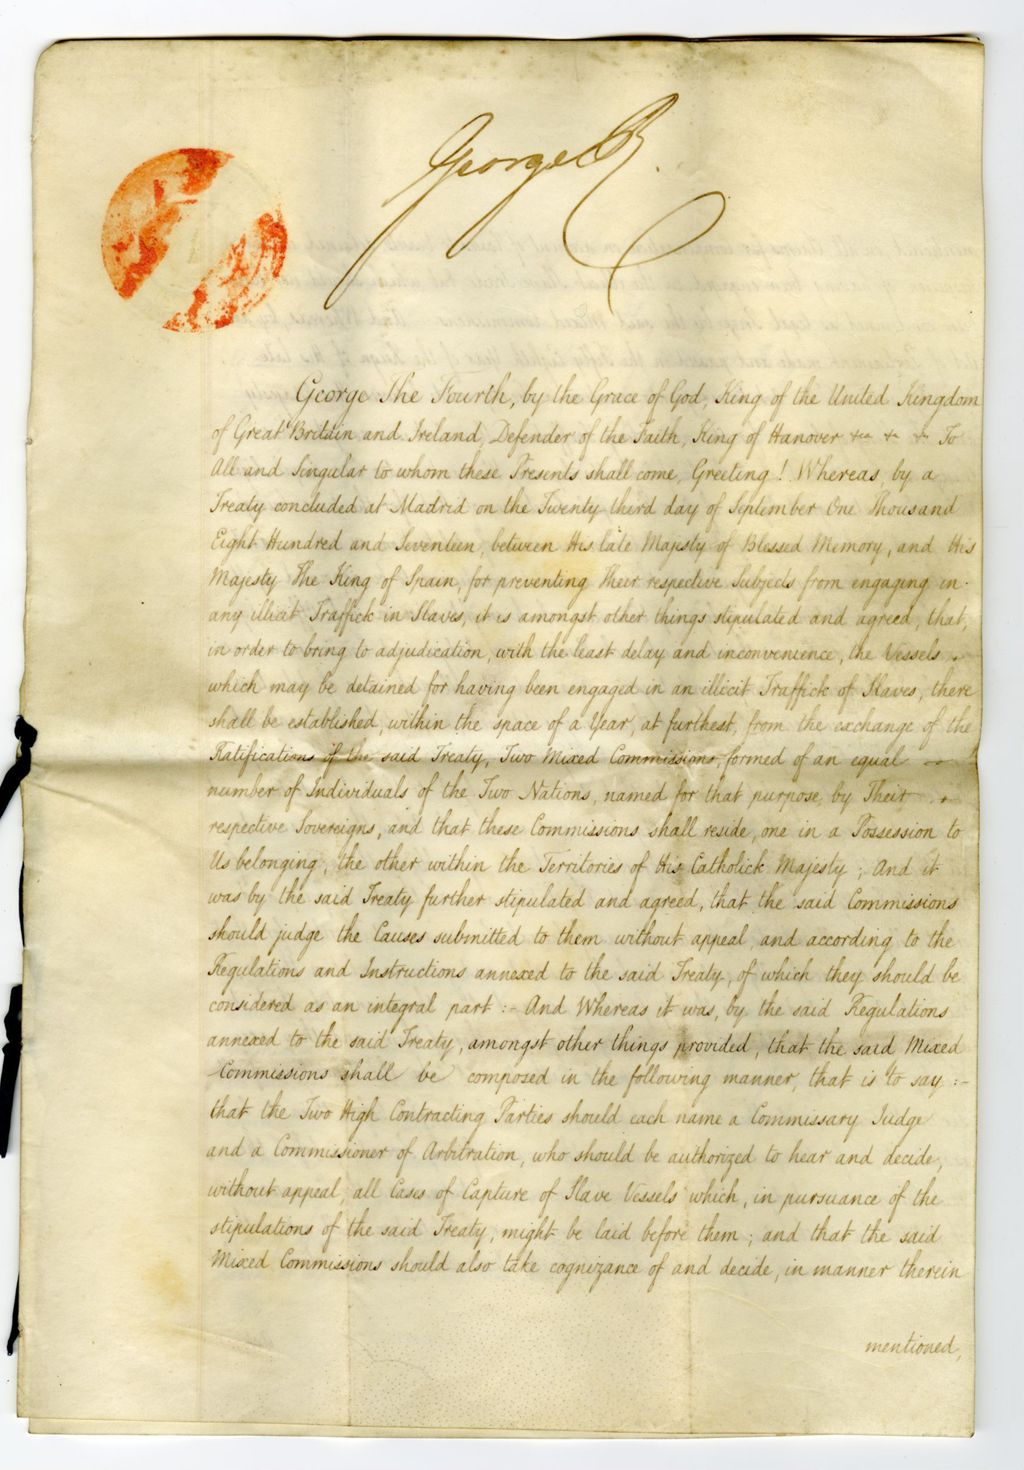 Miniature of Royal Warrant, September 23, 1817, signed by George IV